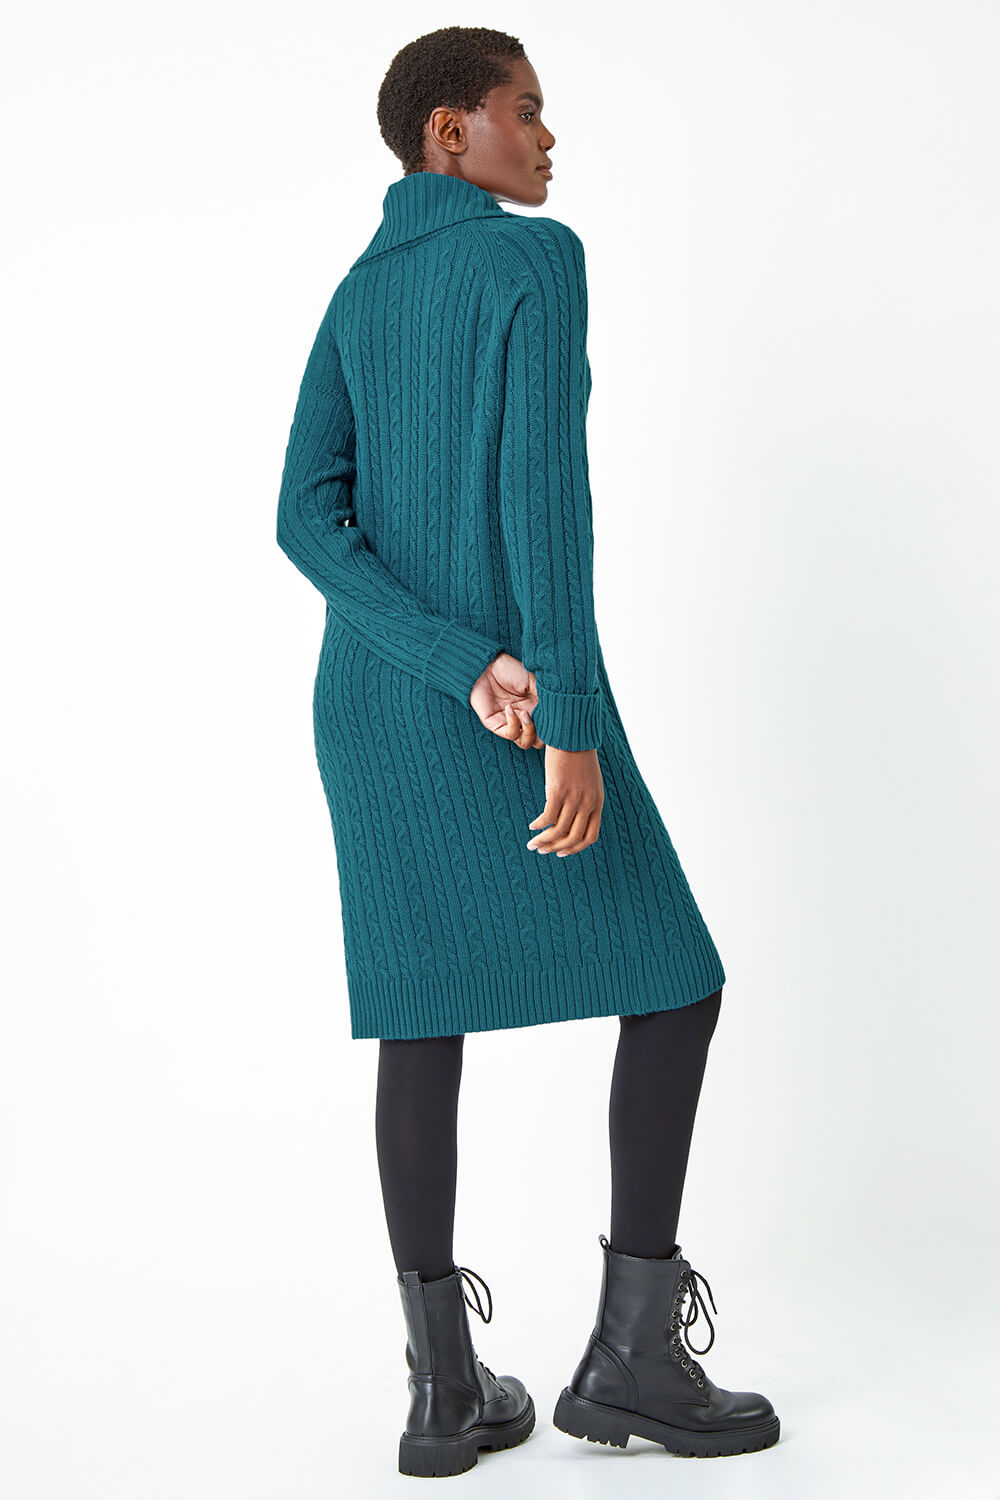 Teal Roll Neck Knitted Jumper Dress, Image 3 of 5